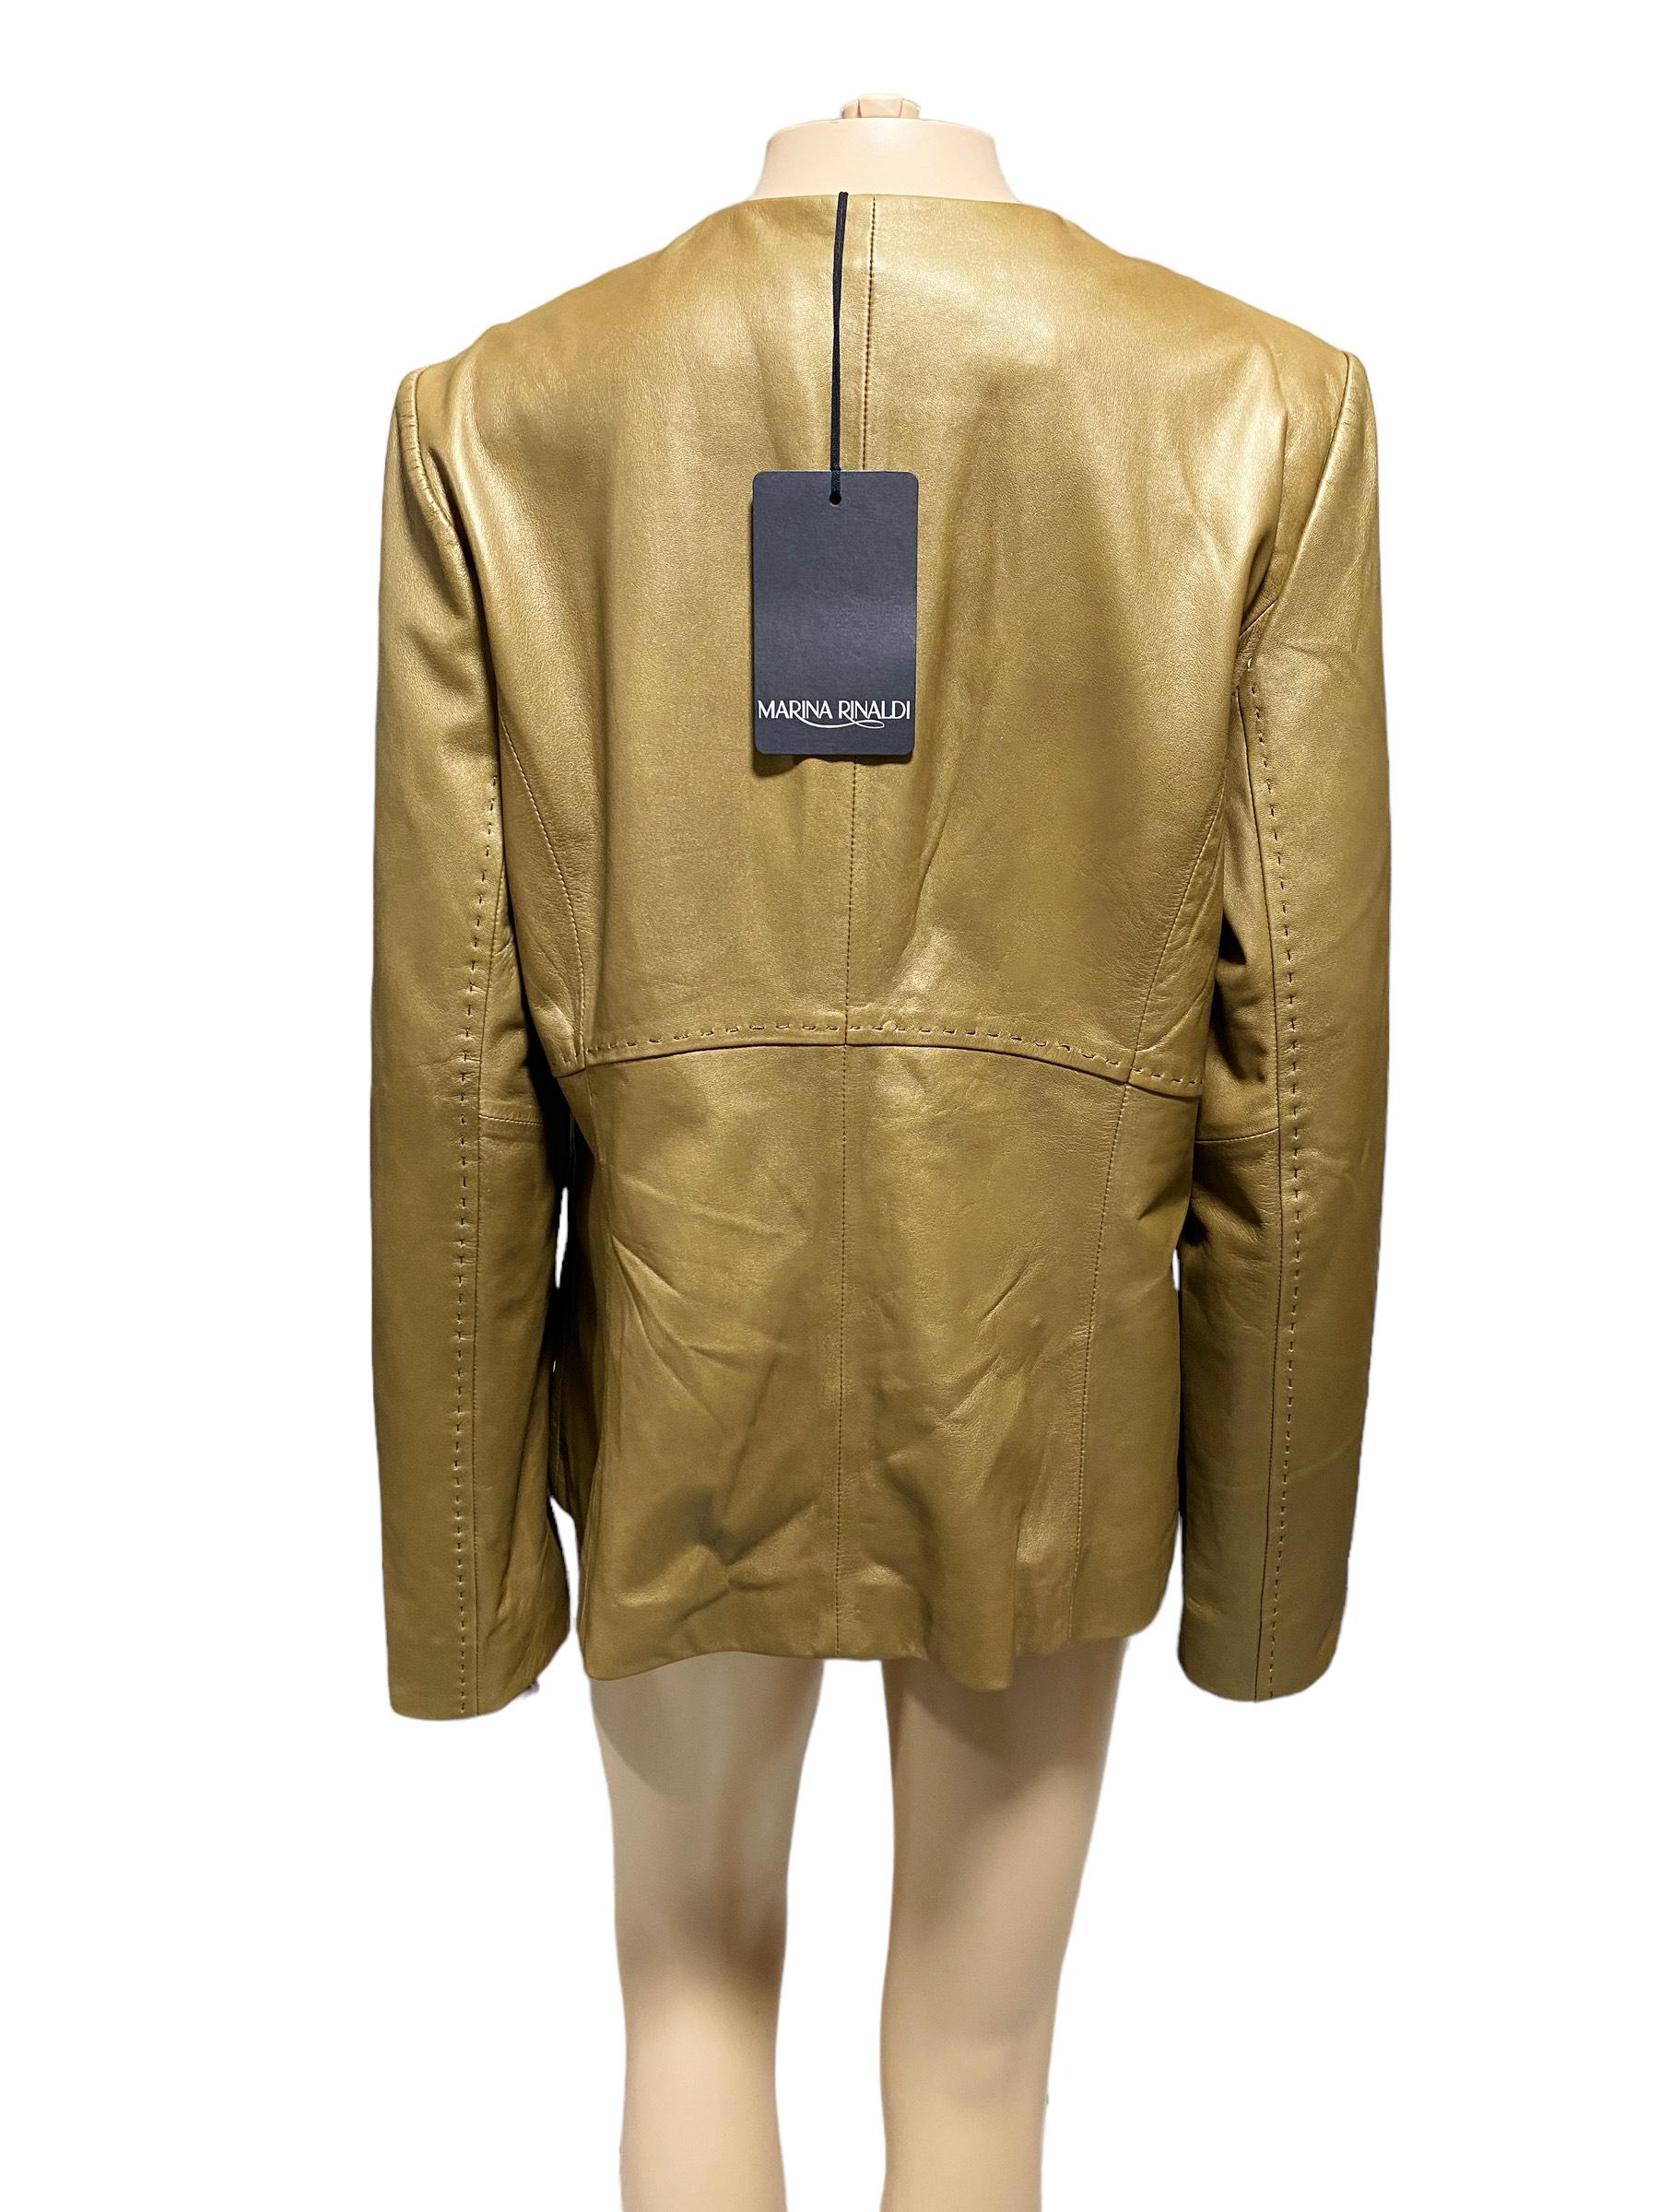 Marina Rinaldi x Max Mara Genuine Leather Jacket - Limited Edition In New Condition For Sale In Iba, PH